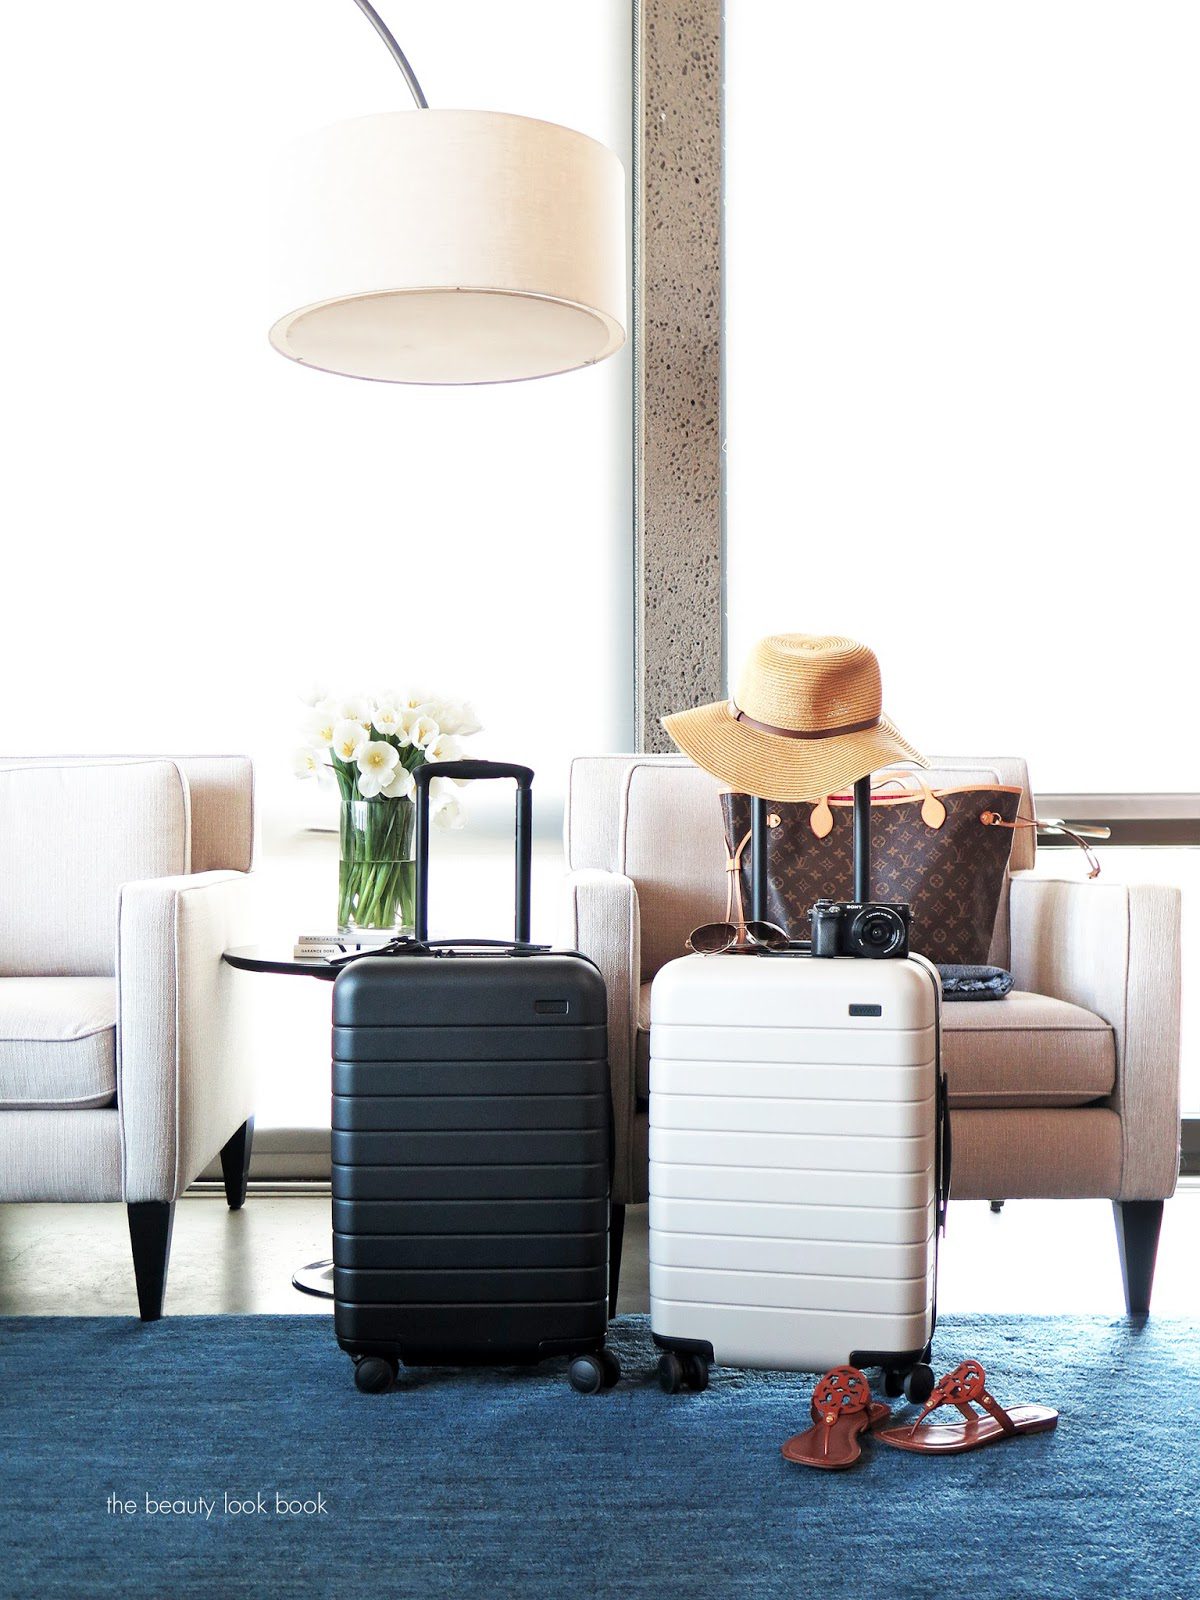 Away Carry On Luggage Review via The Beauty Look Book